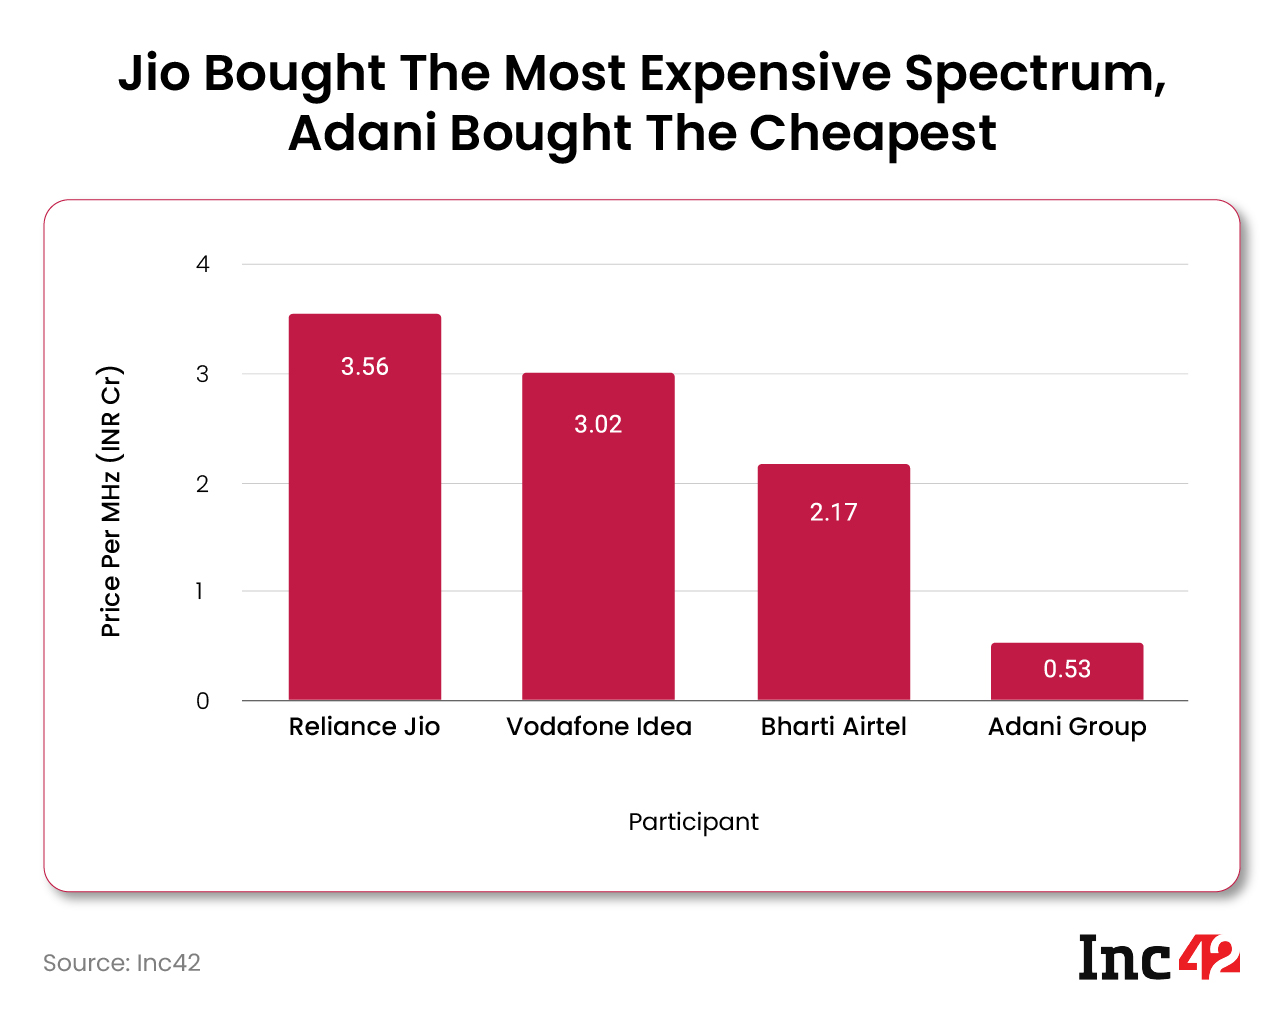 Jio bought the most expensive spectrum while Adani bought the cheapest